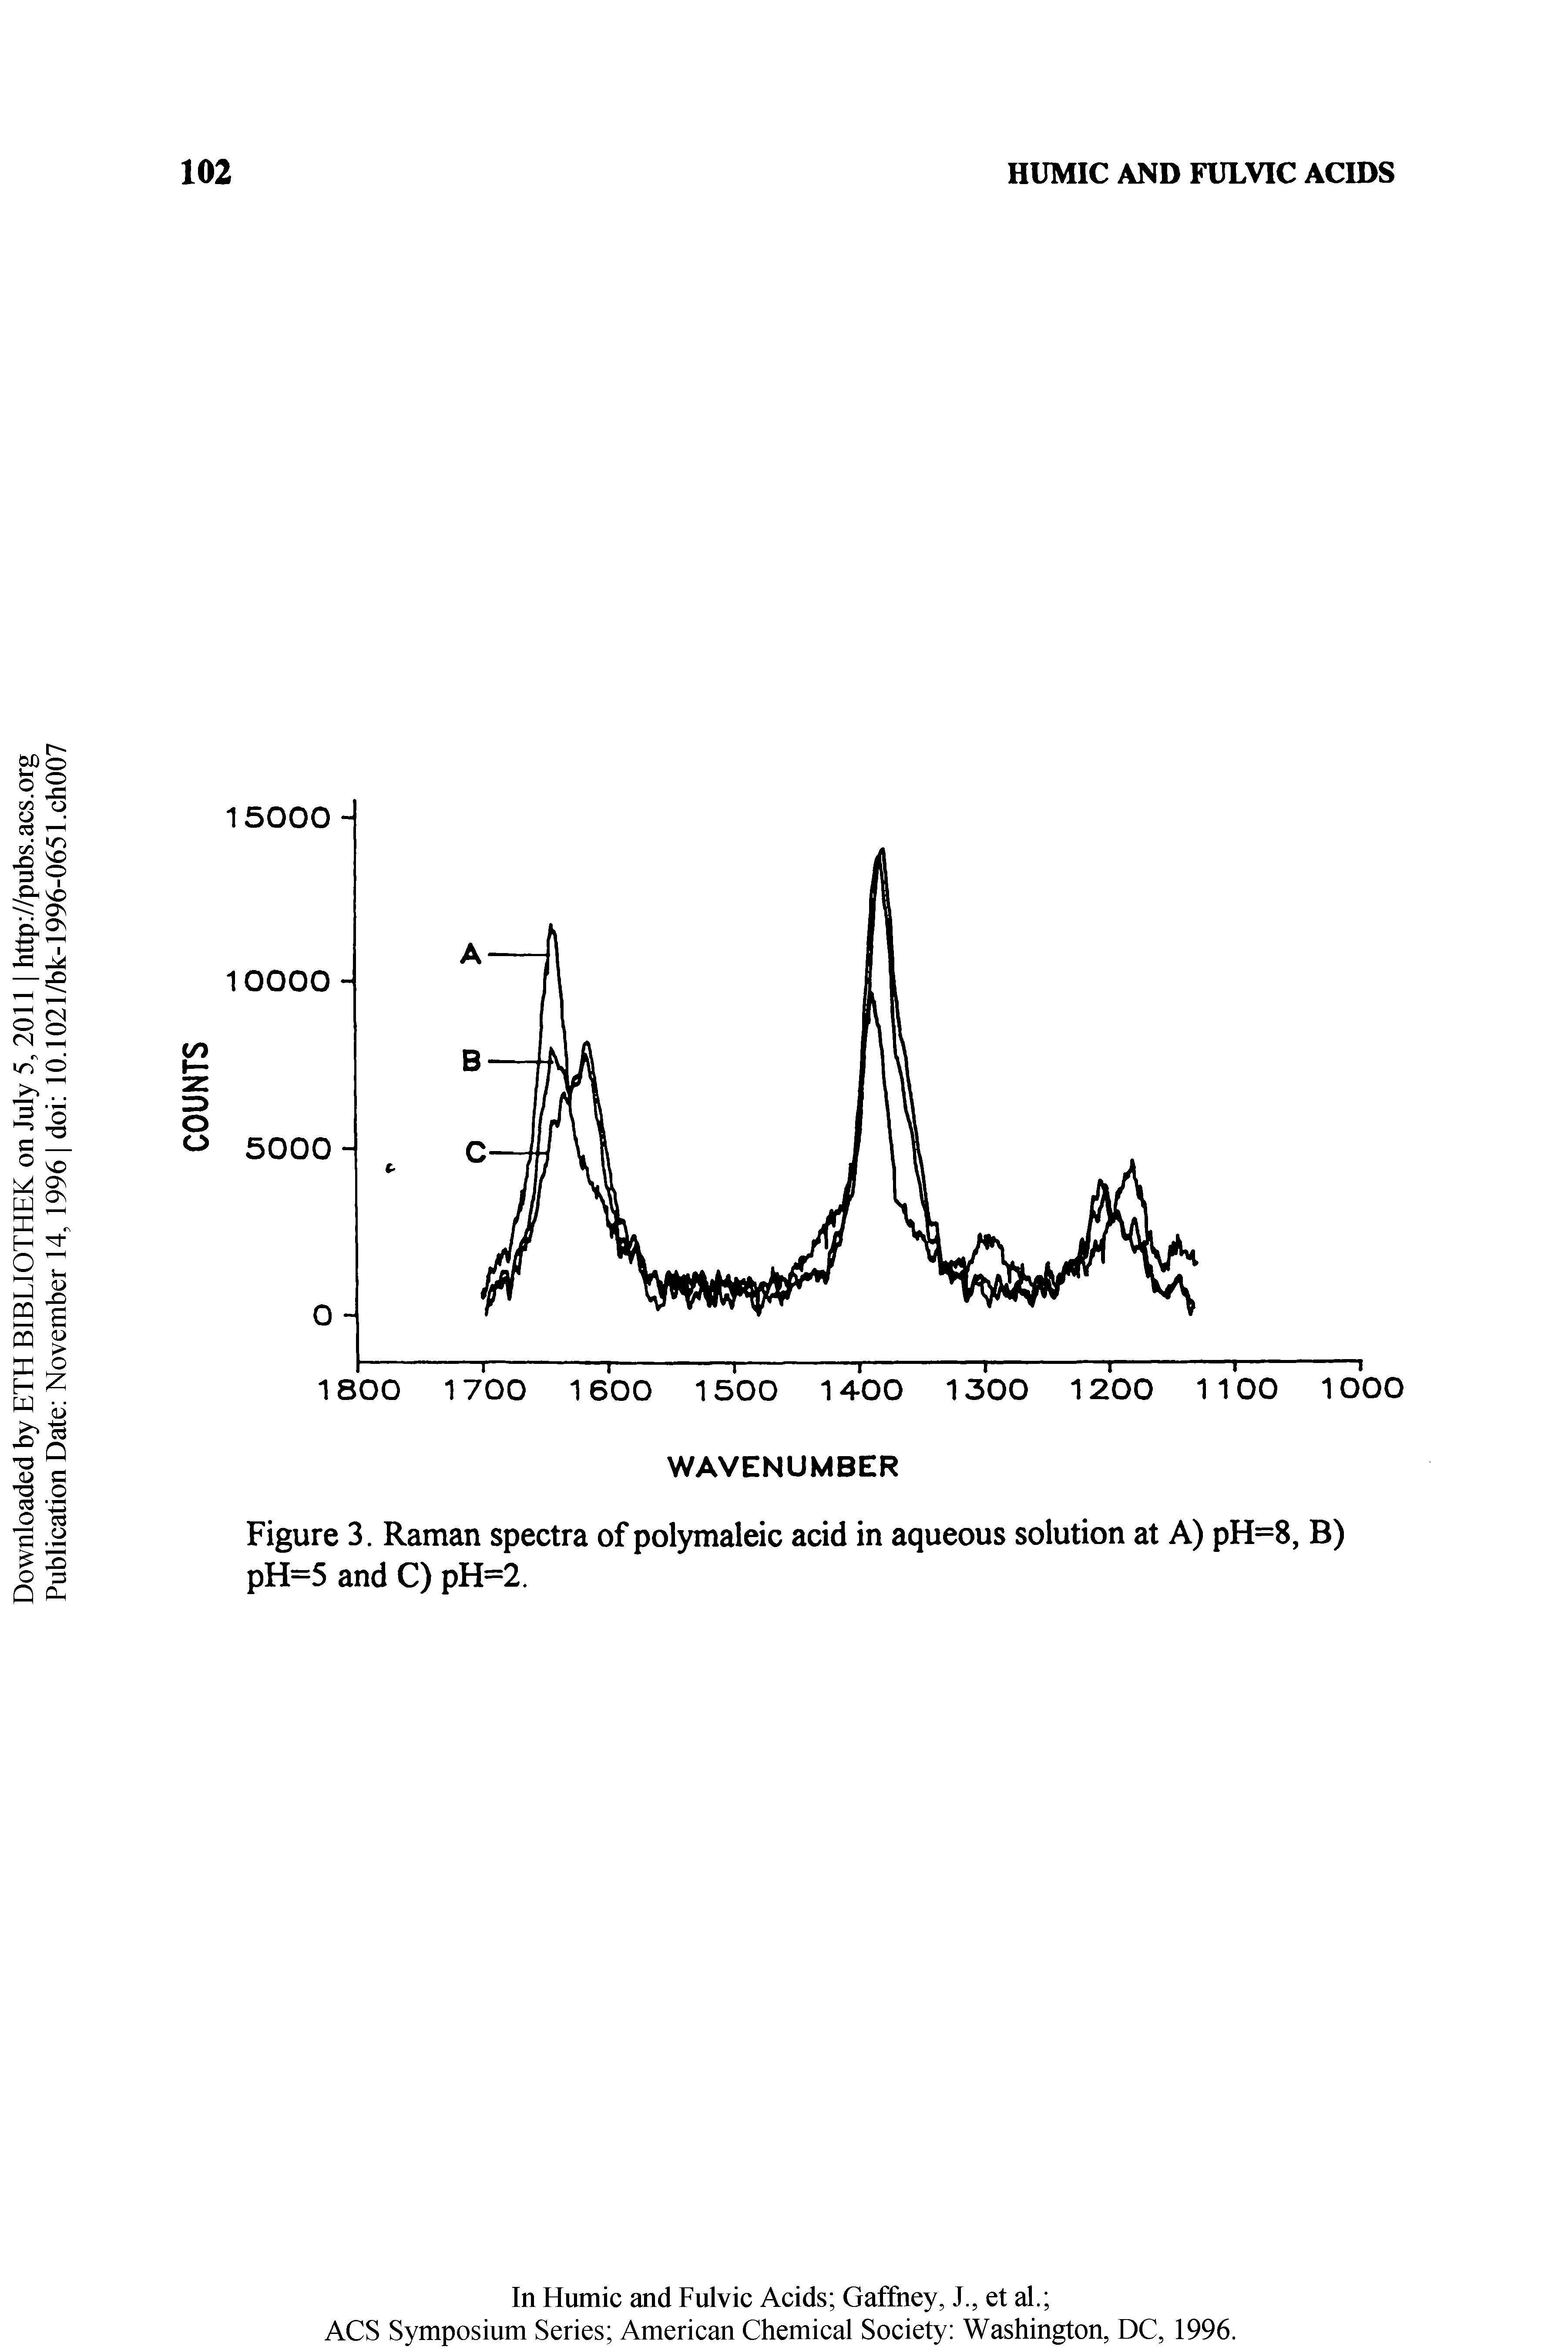 Figure 3, Raman spectra of polymaleic acid in aqueous solution at A) pH=8, B) pH=5 and C) pH=2.